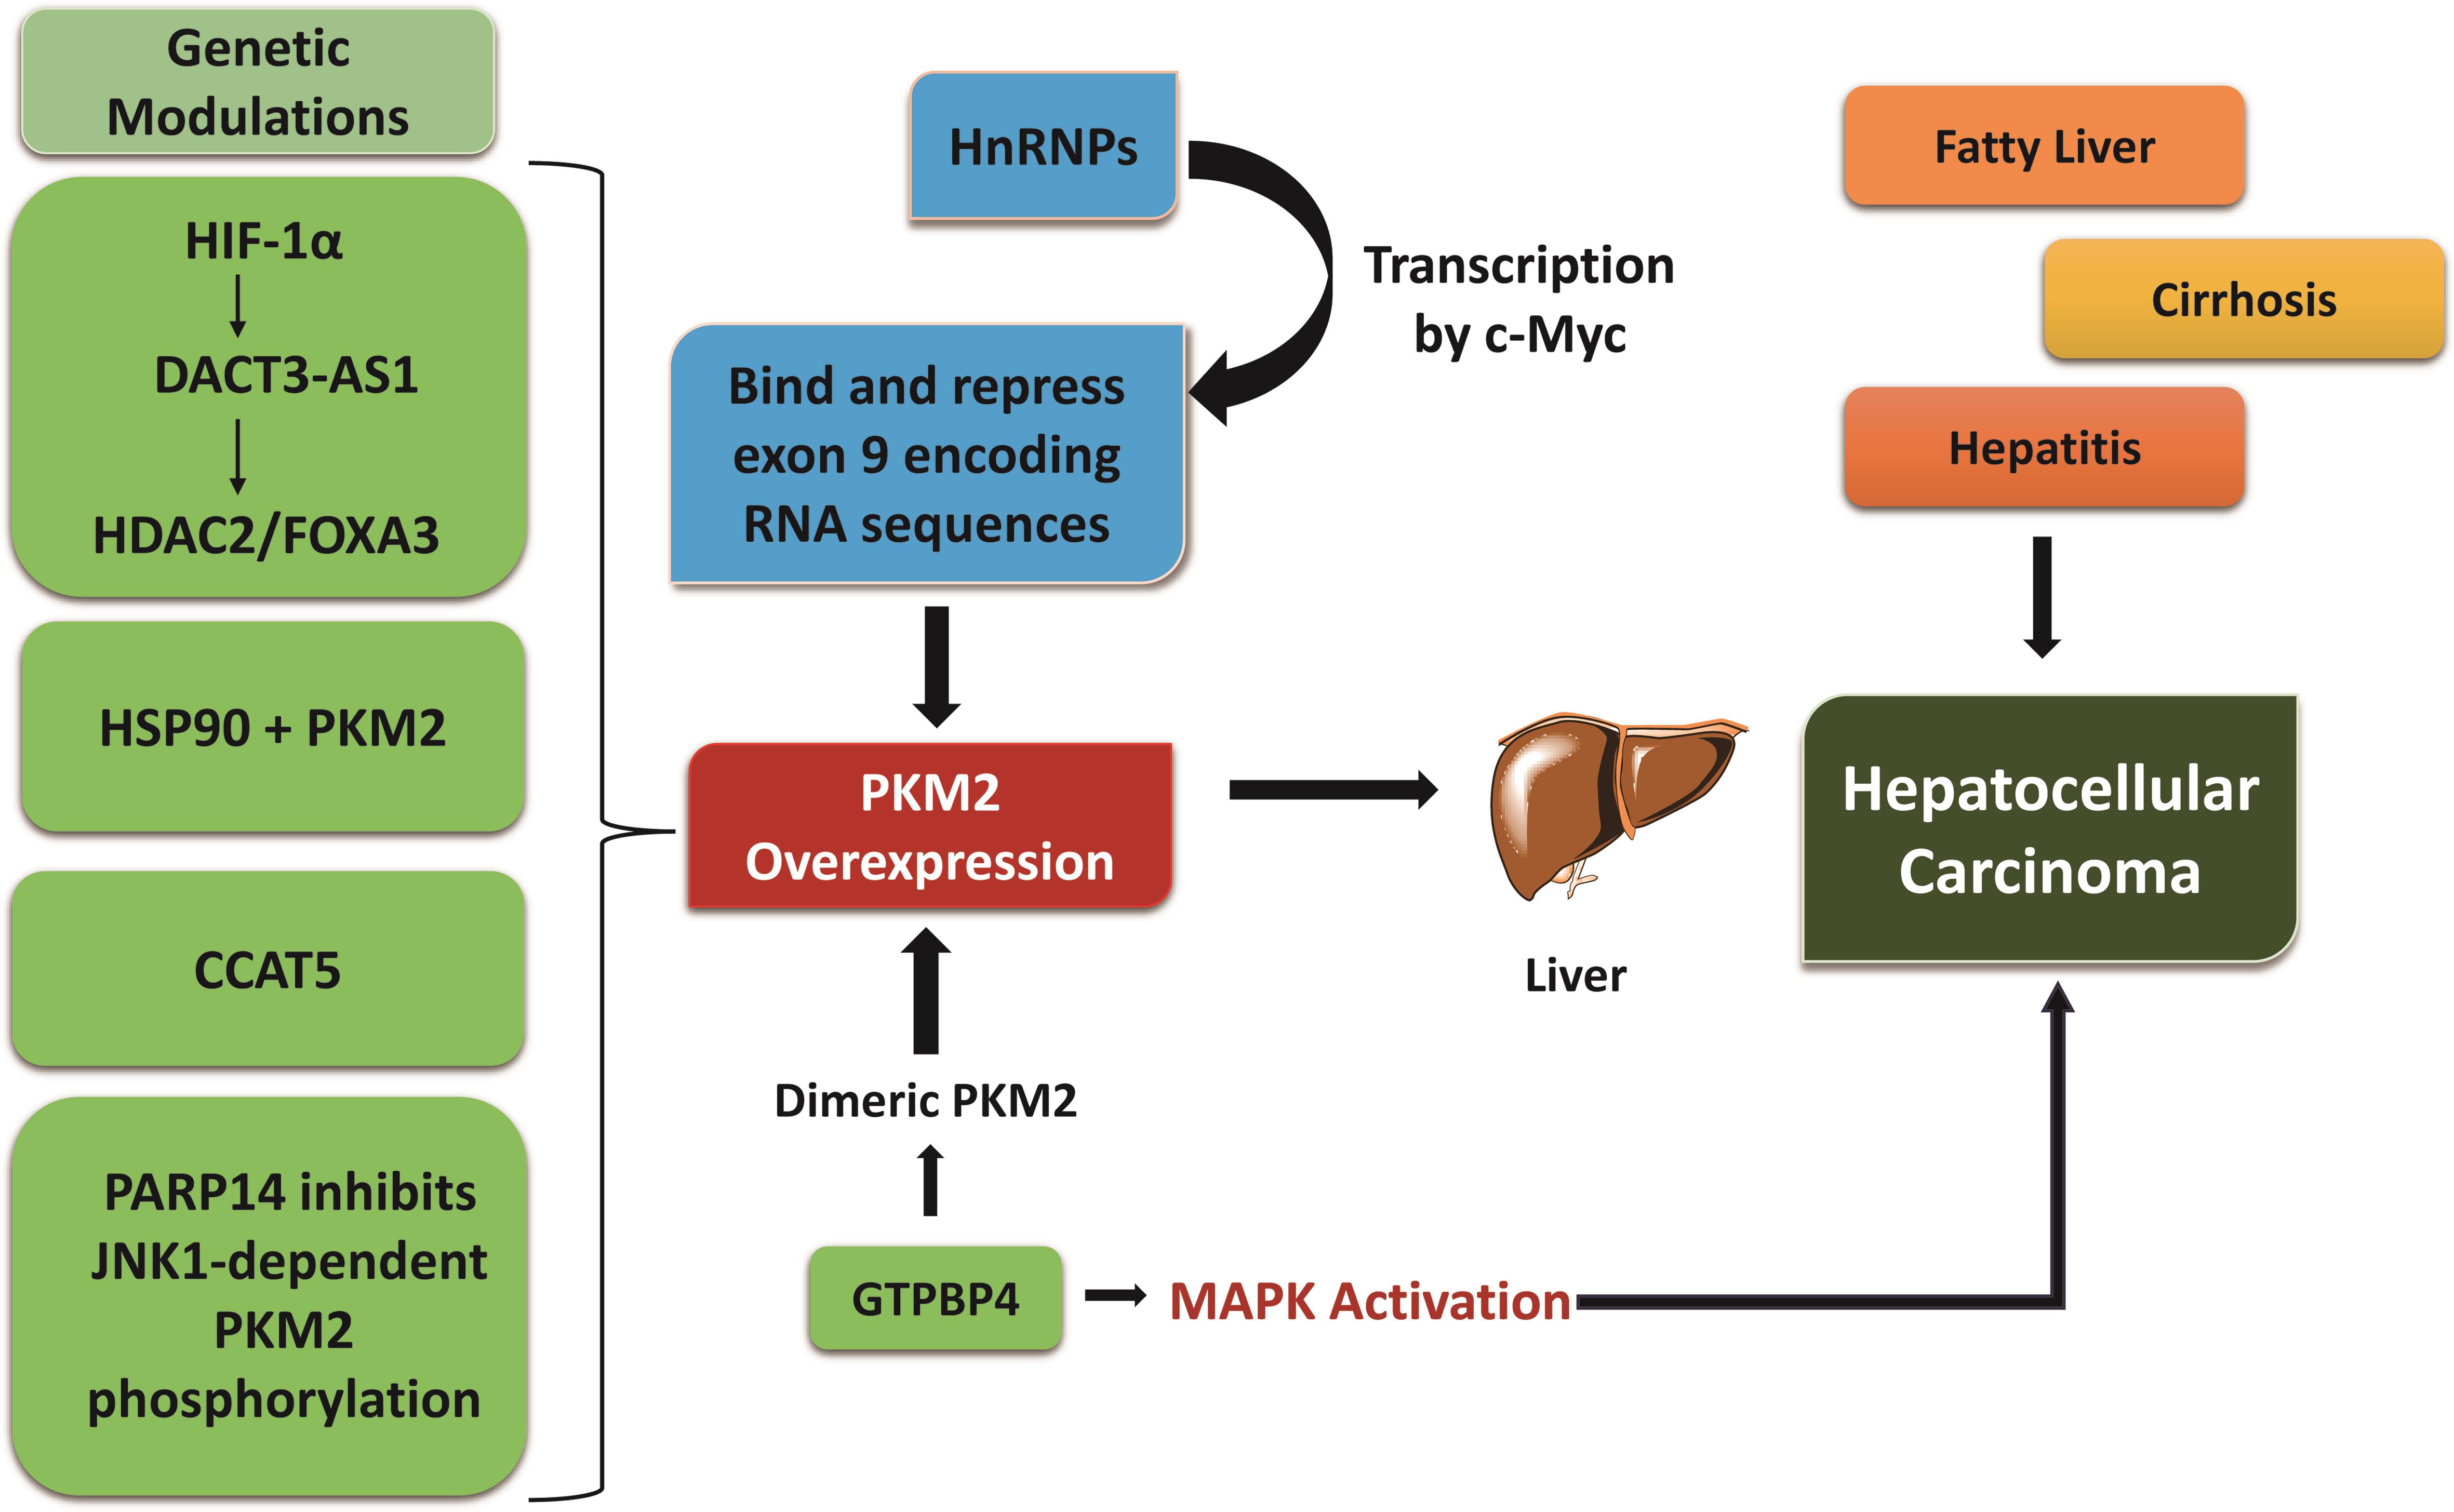 Schematic representation provides insight into the intricate molecular factors contributing to liver diseases and genetic modulations of markers like HDAC2/FOXA3, HSP90, CCAT5, PARP14 along with GTPBP4 which eventually results in pyruvate kinase M2 overexpression, finally leading to alterations causing hepatic abnormalities.